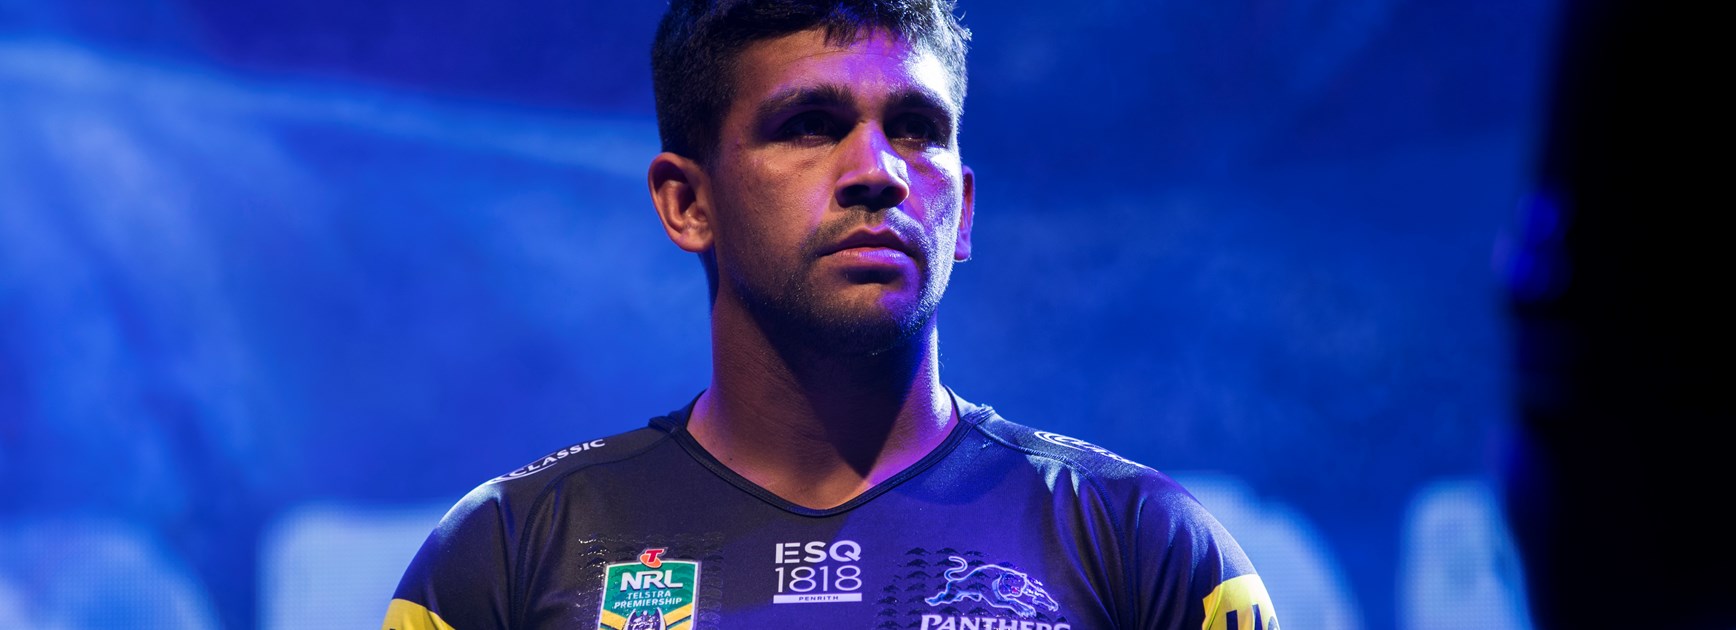 Peachey to depart Panthers in 2019